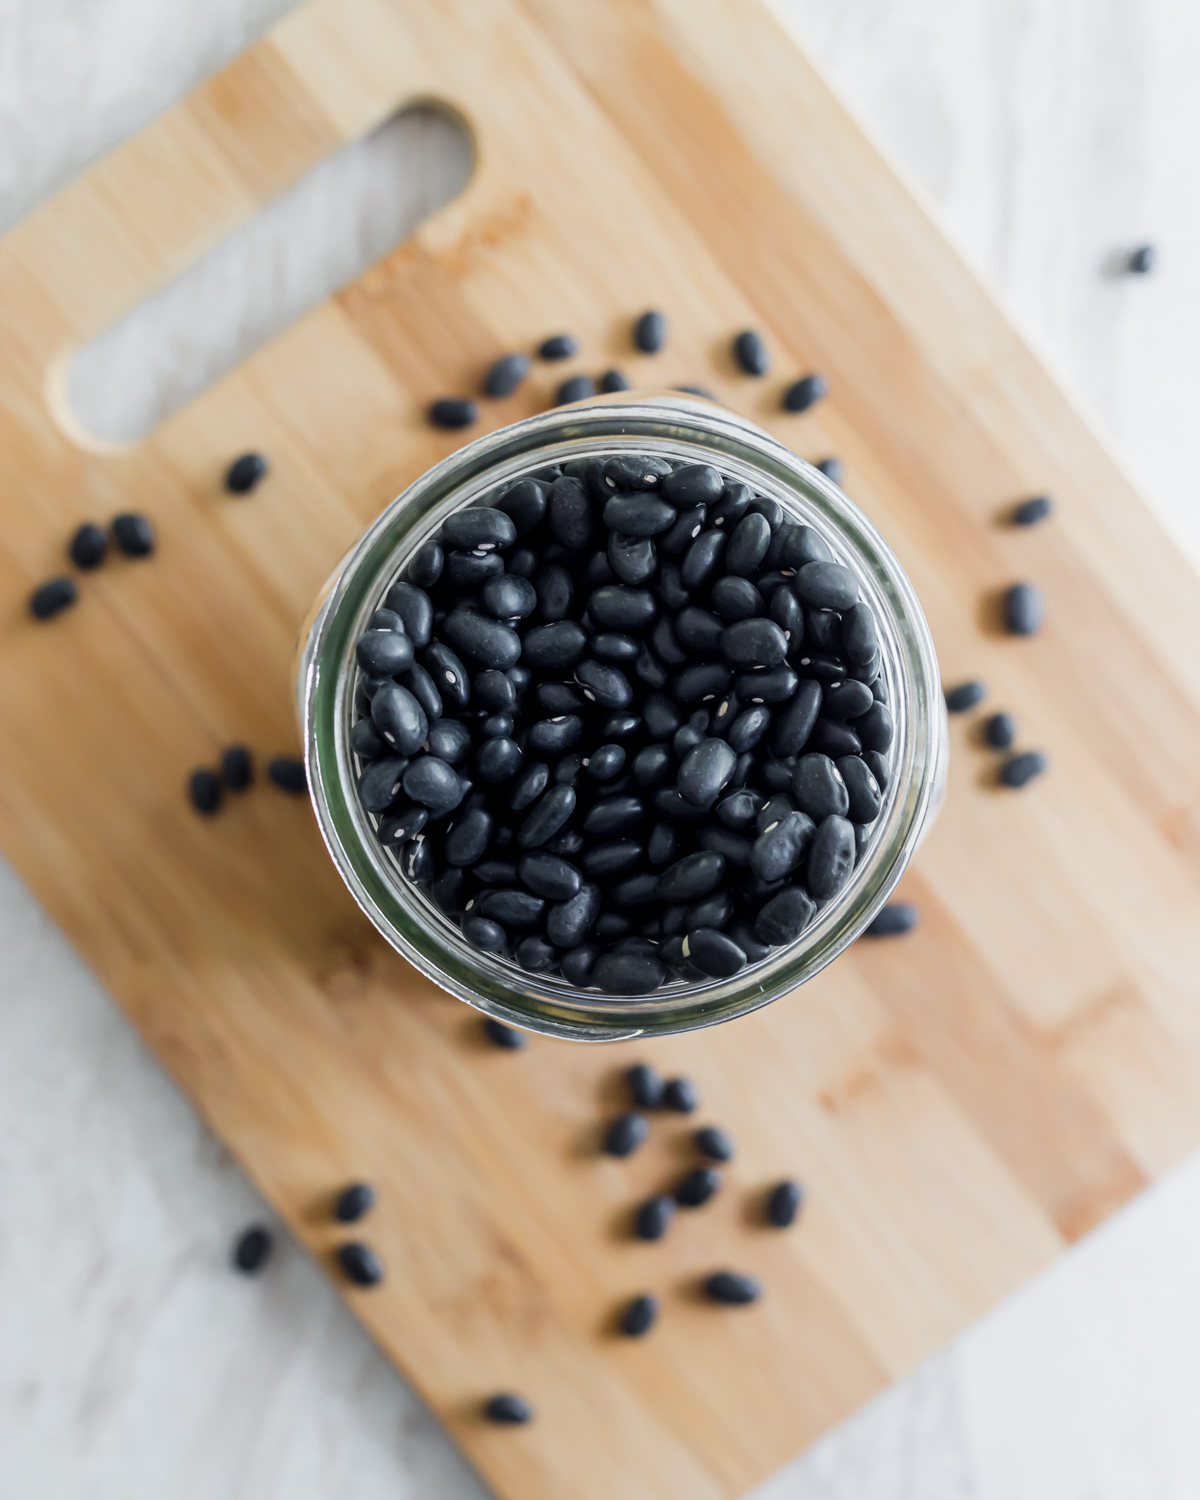 Dry black beans in a glass jar on a cutting board.